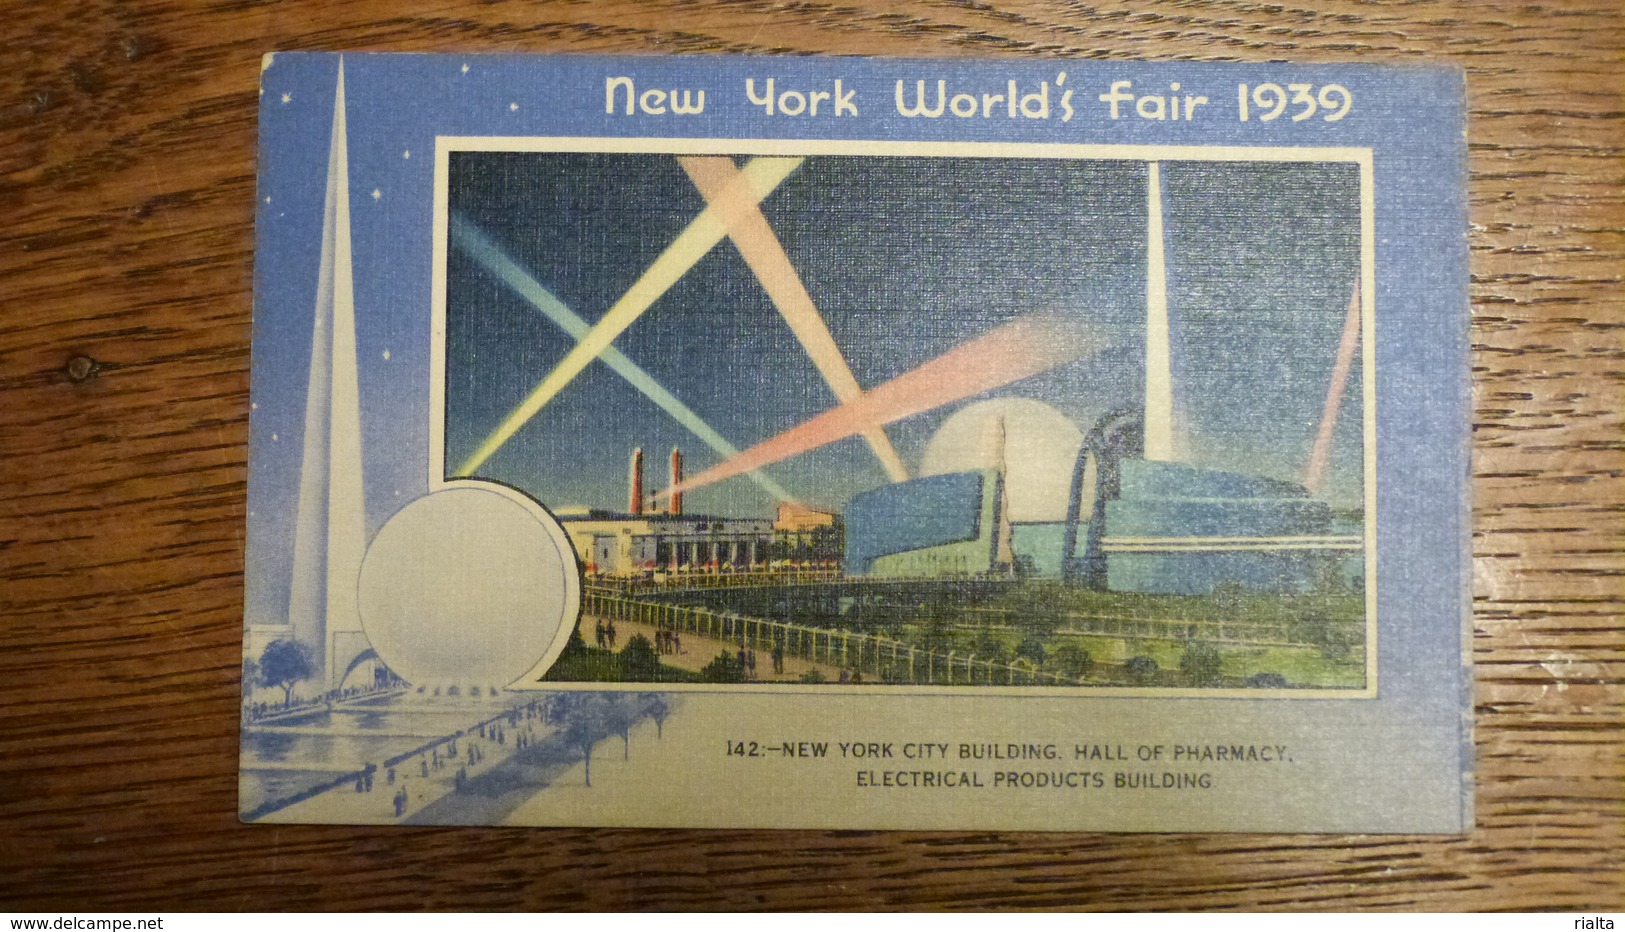 ETATS-UNIS, NEW YORK WORLD'S FAIR 1939, NEW YORK CITY BUILDING, HALL OF PHARMACY ELECTRICAL PRODUCTS BUILDING - Mostre, Esposizioni